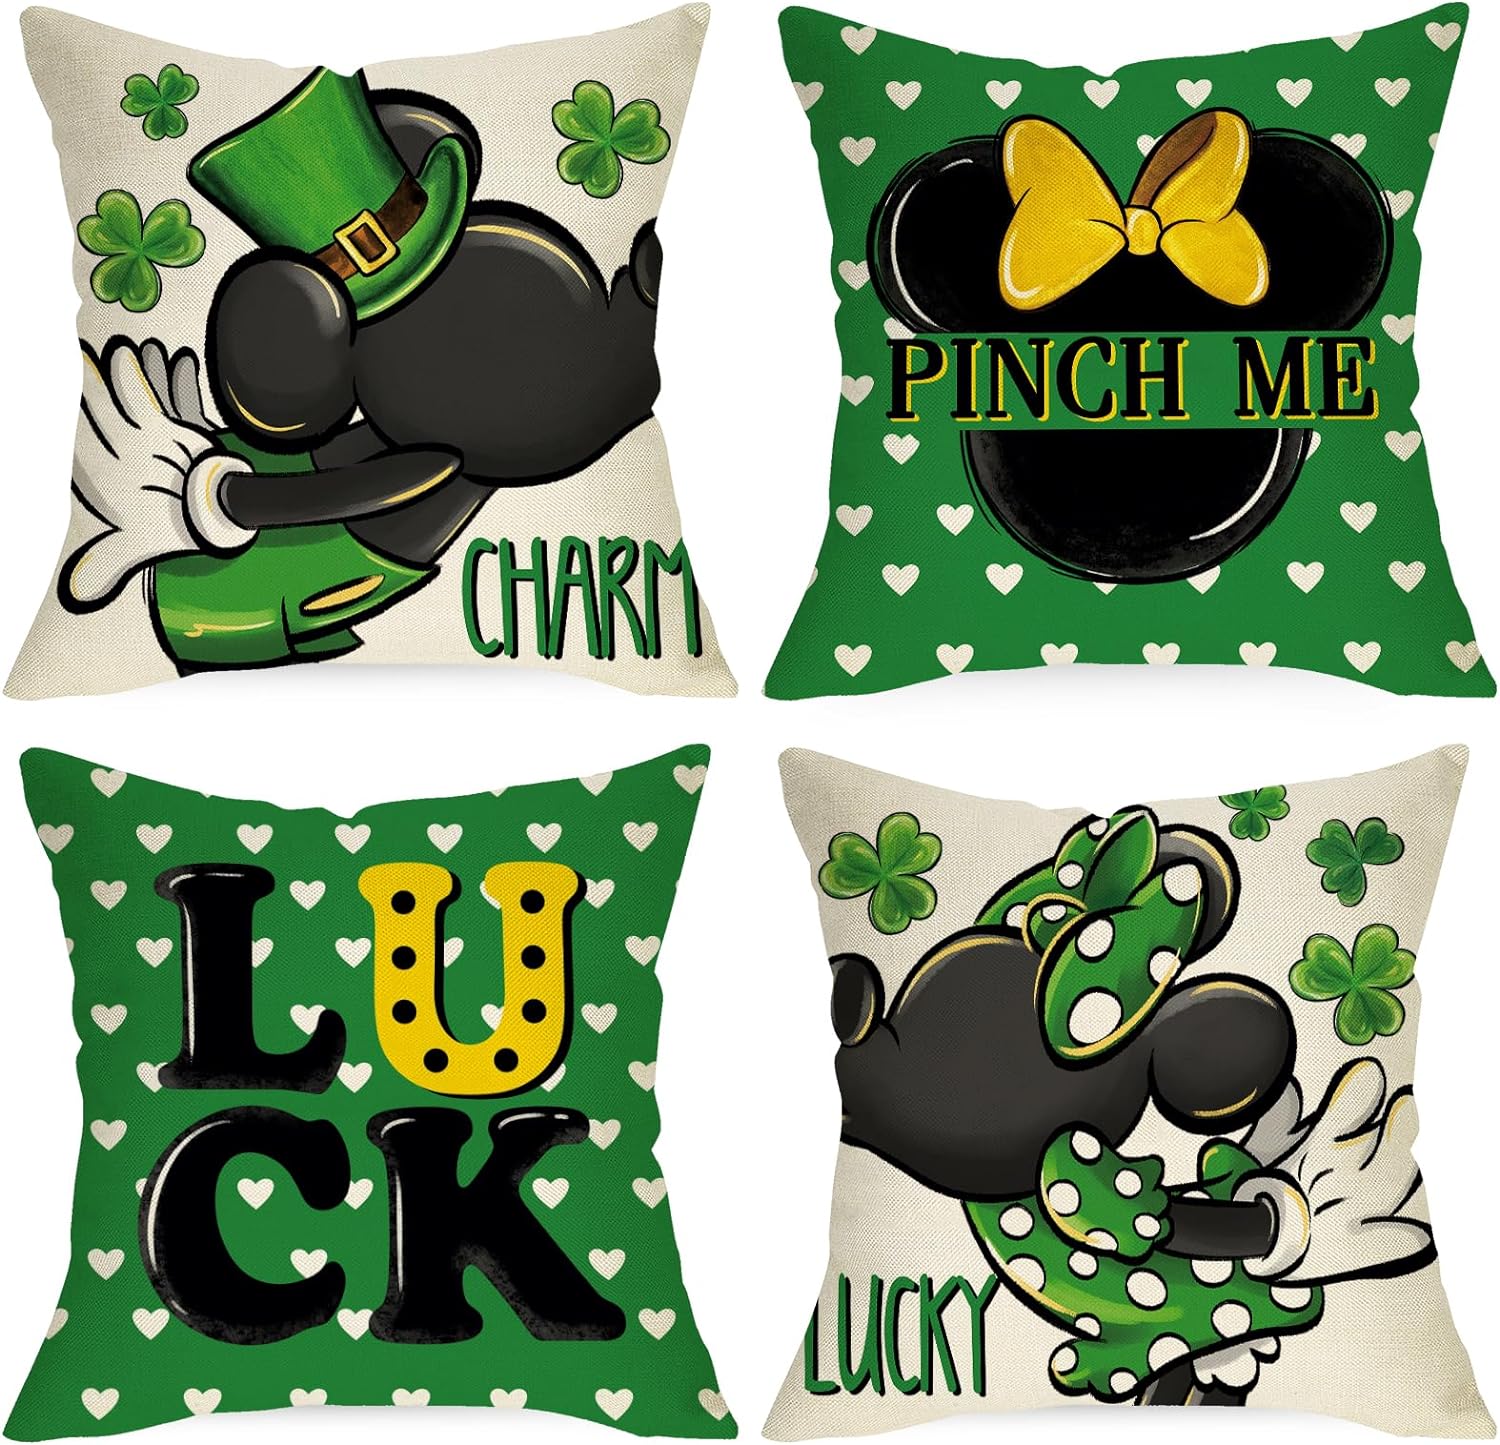 St. Patrick's Day Cartoon Mouse Decorative Throw Pillow Covers 18 x 18 Set of 4, Luck Shamrock Clover Love Hearts Cushion Case Decor, Pinch Me Charm Irish Holiday Home Decoration for Sofa Couch